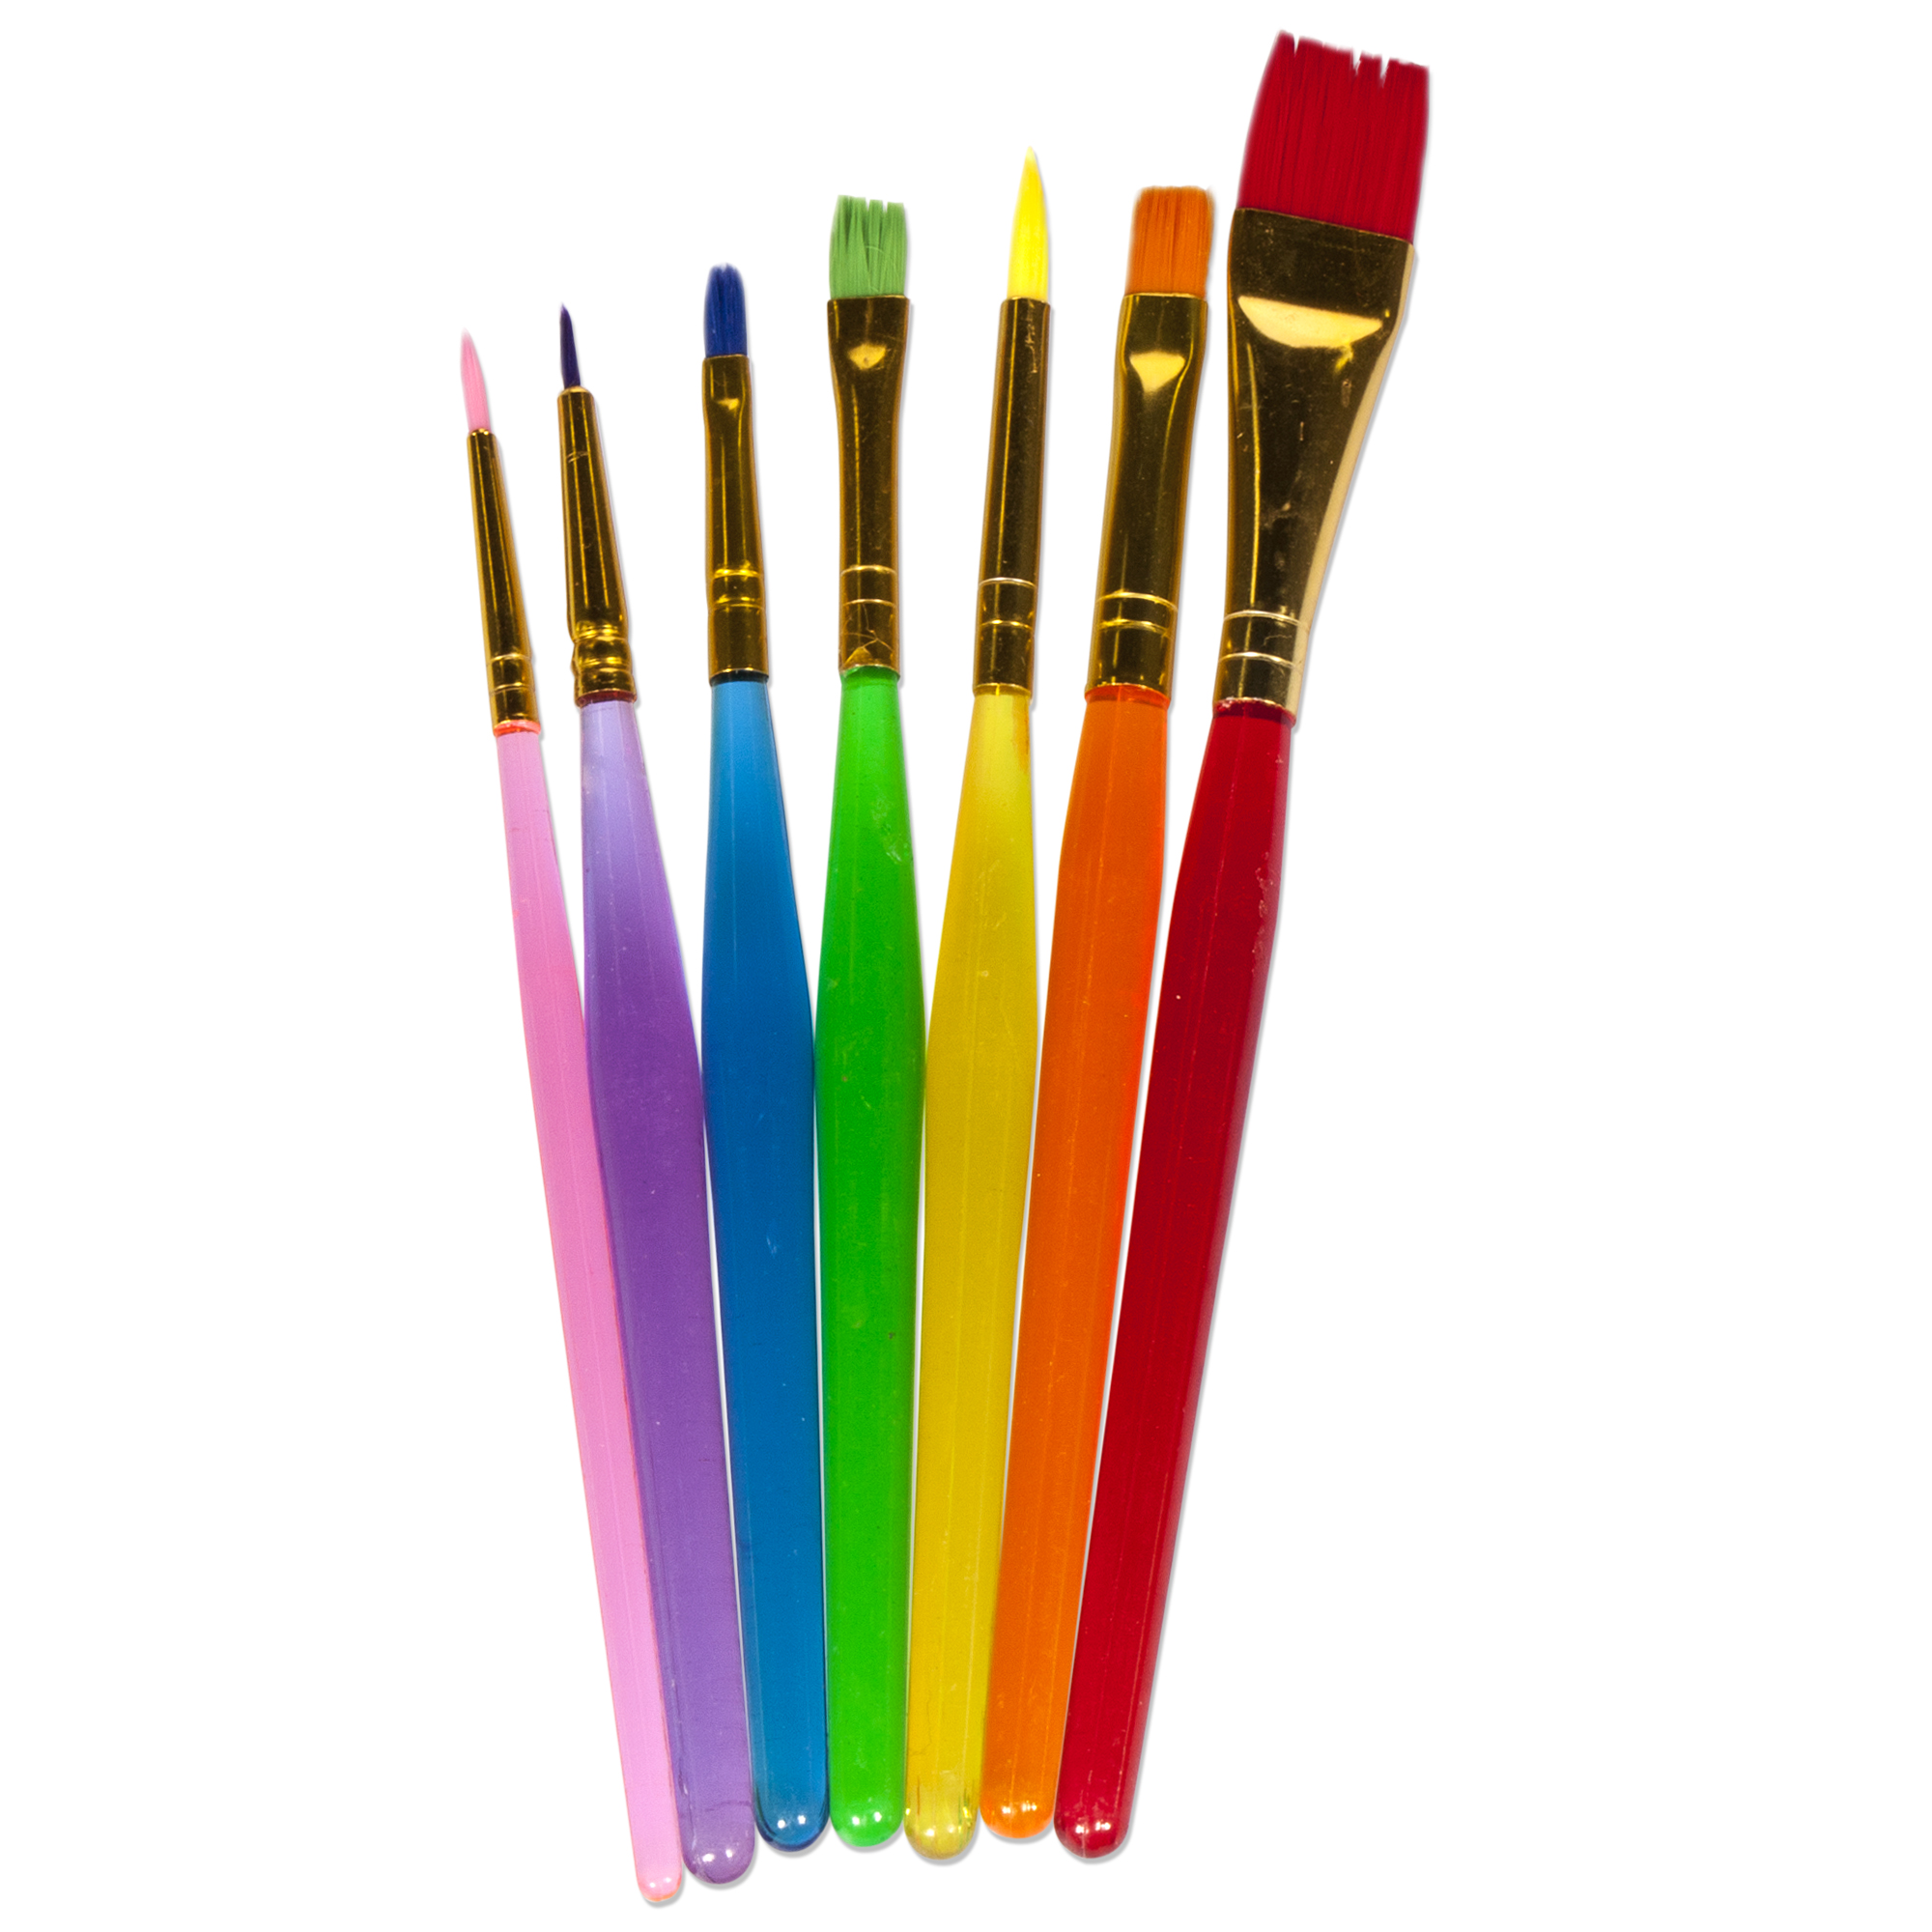 Cra-Z-Art All Purpose Artist Paint Brushes, Multicolor, 7 Count, Child to Adult, Back to School - image 3 of 9